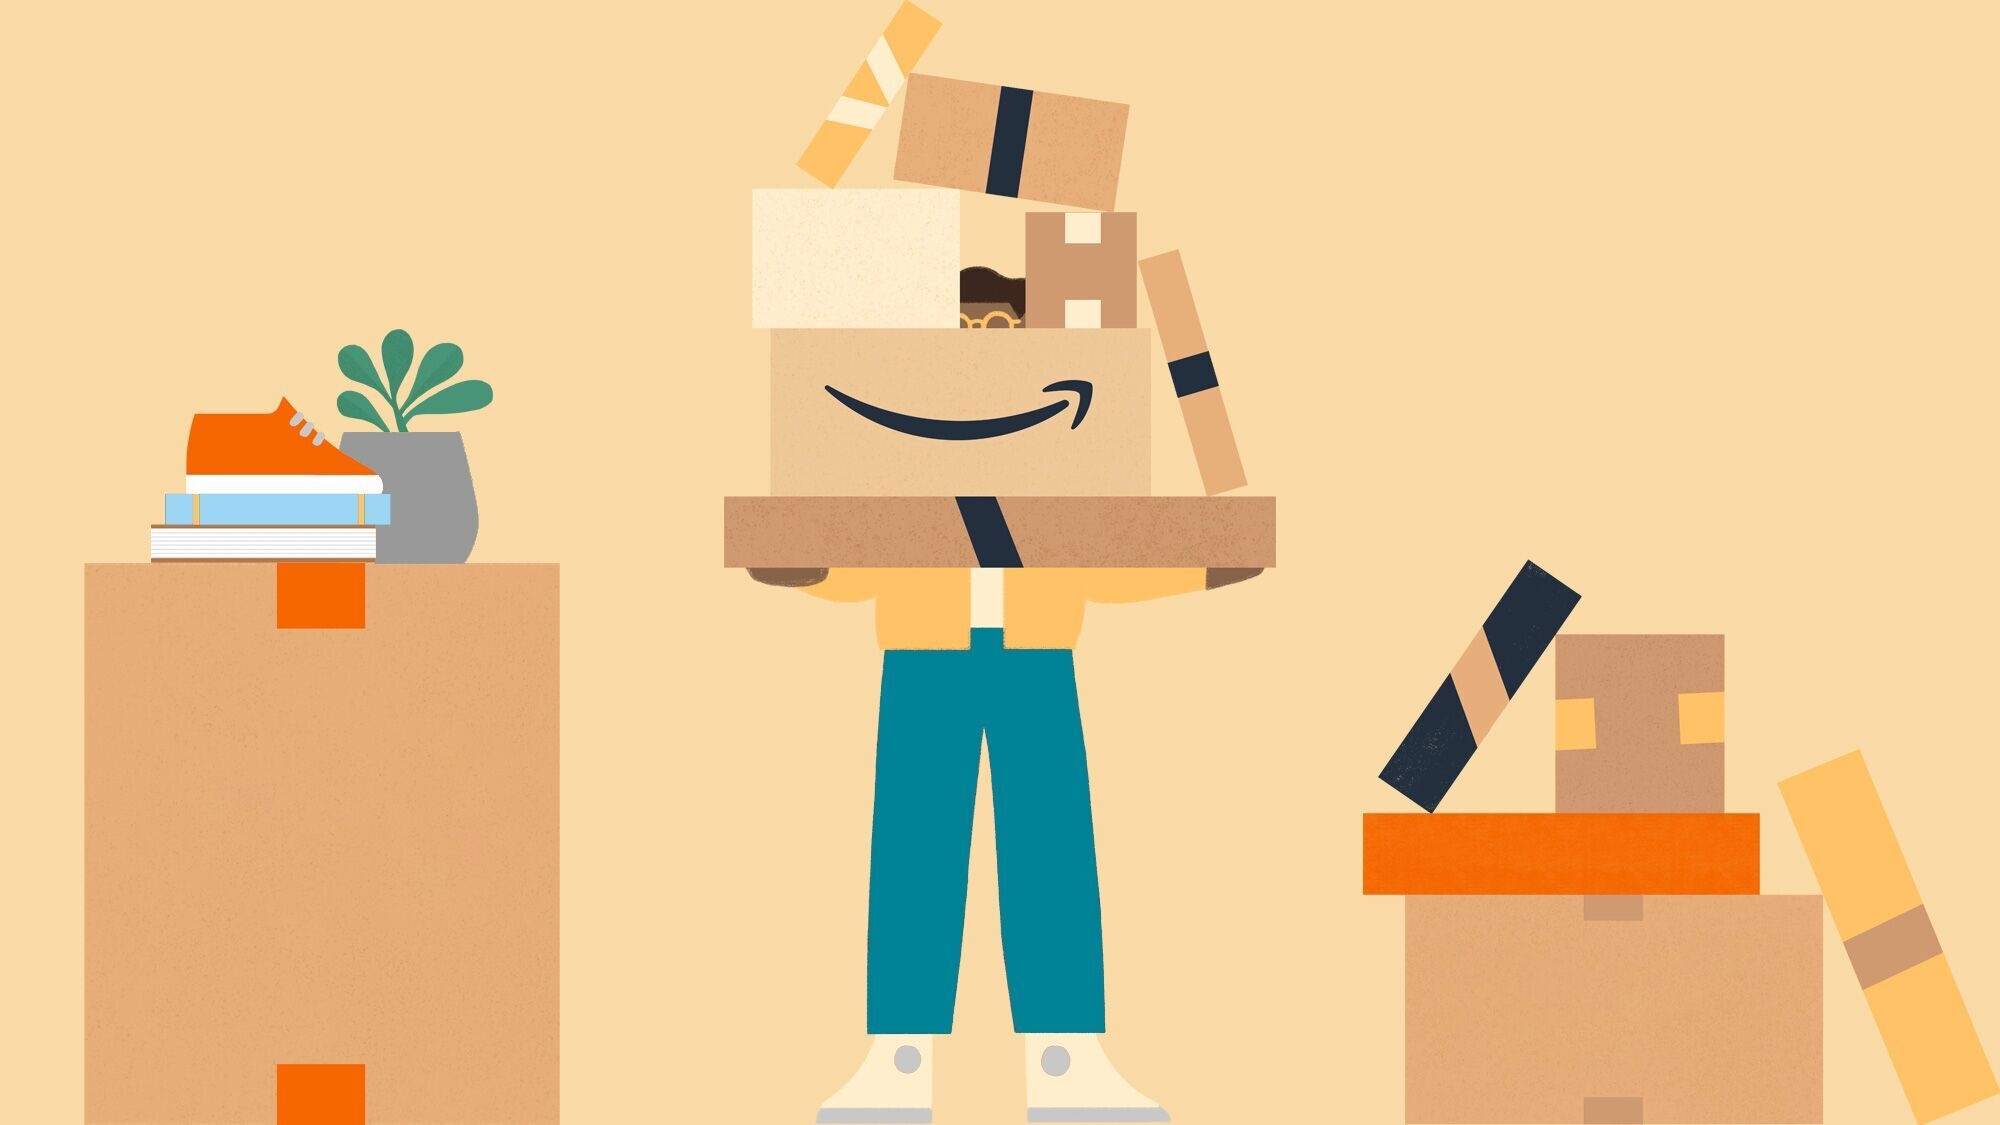 A graphic of a person holding a stack of boxes including an Amazon box.